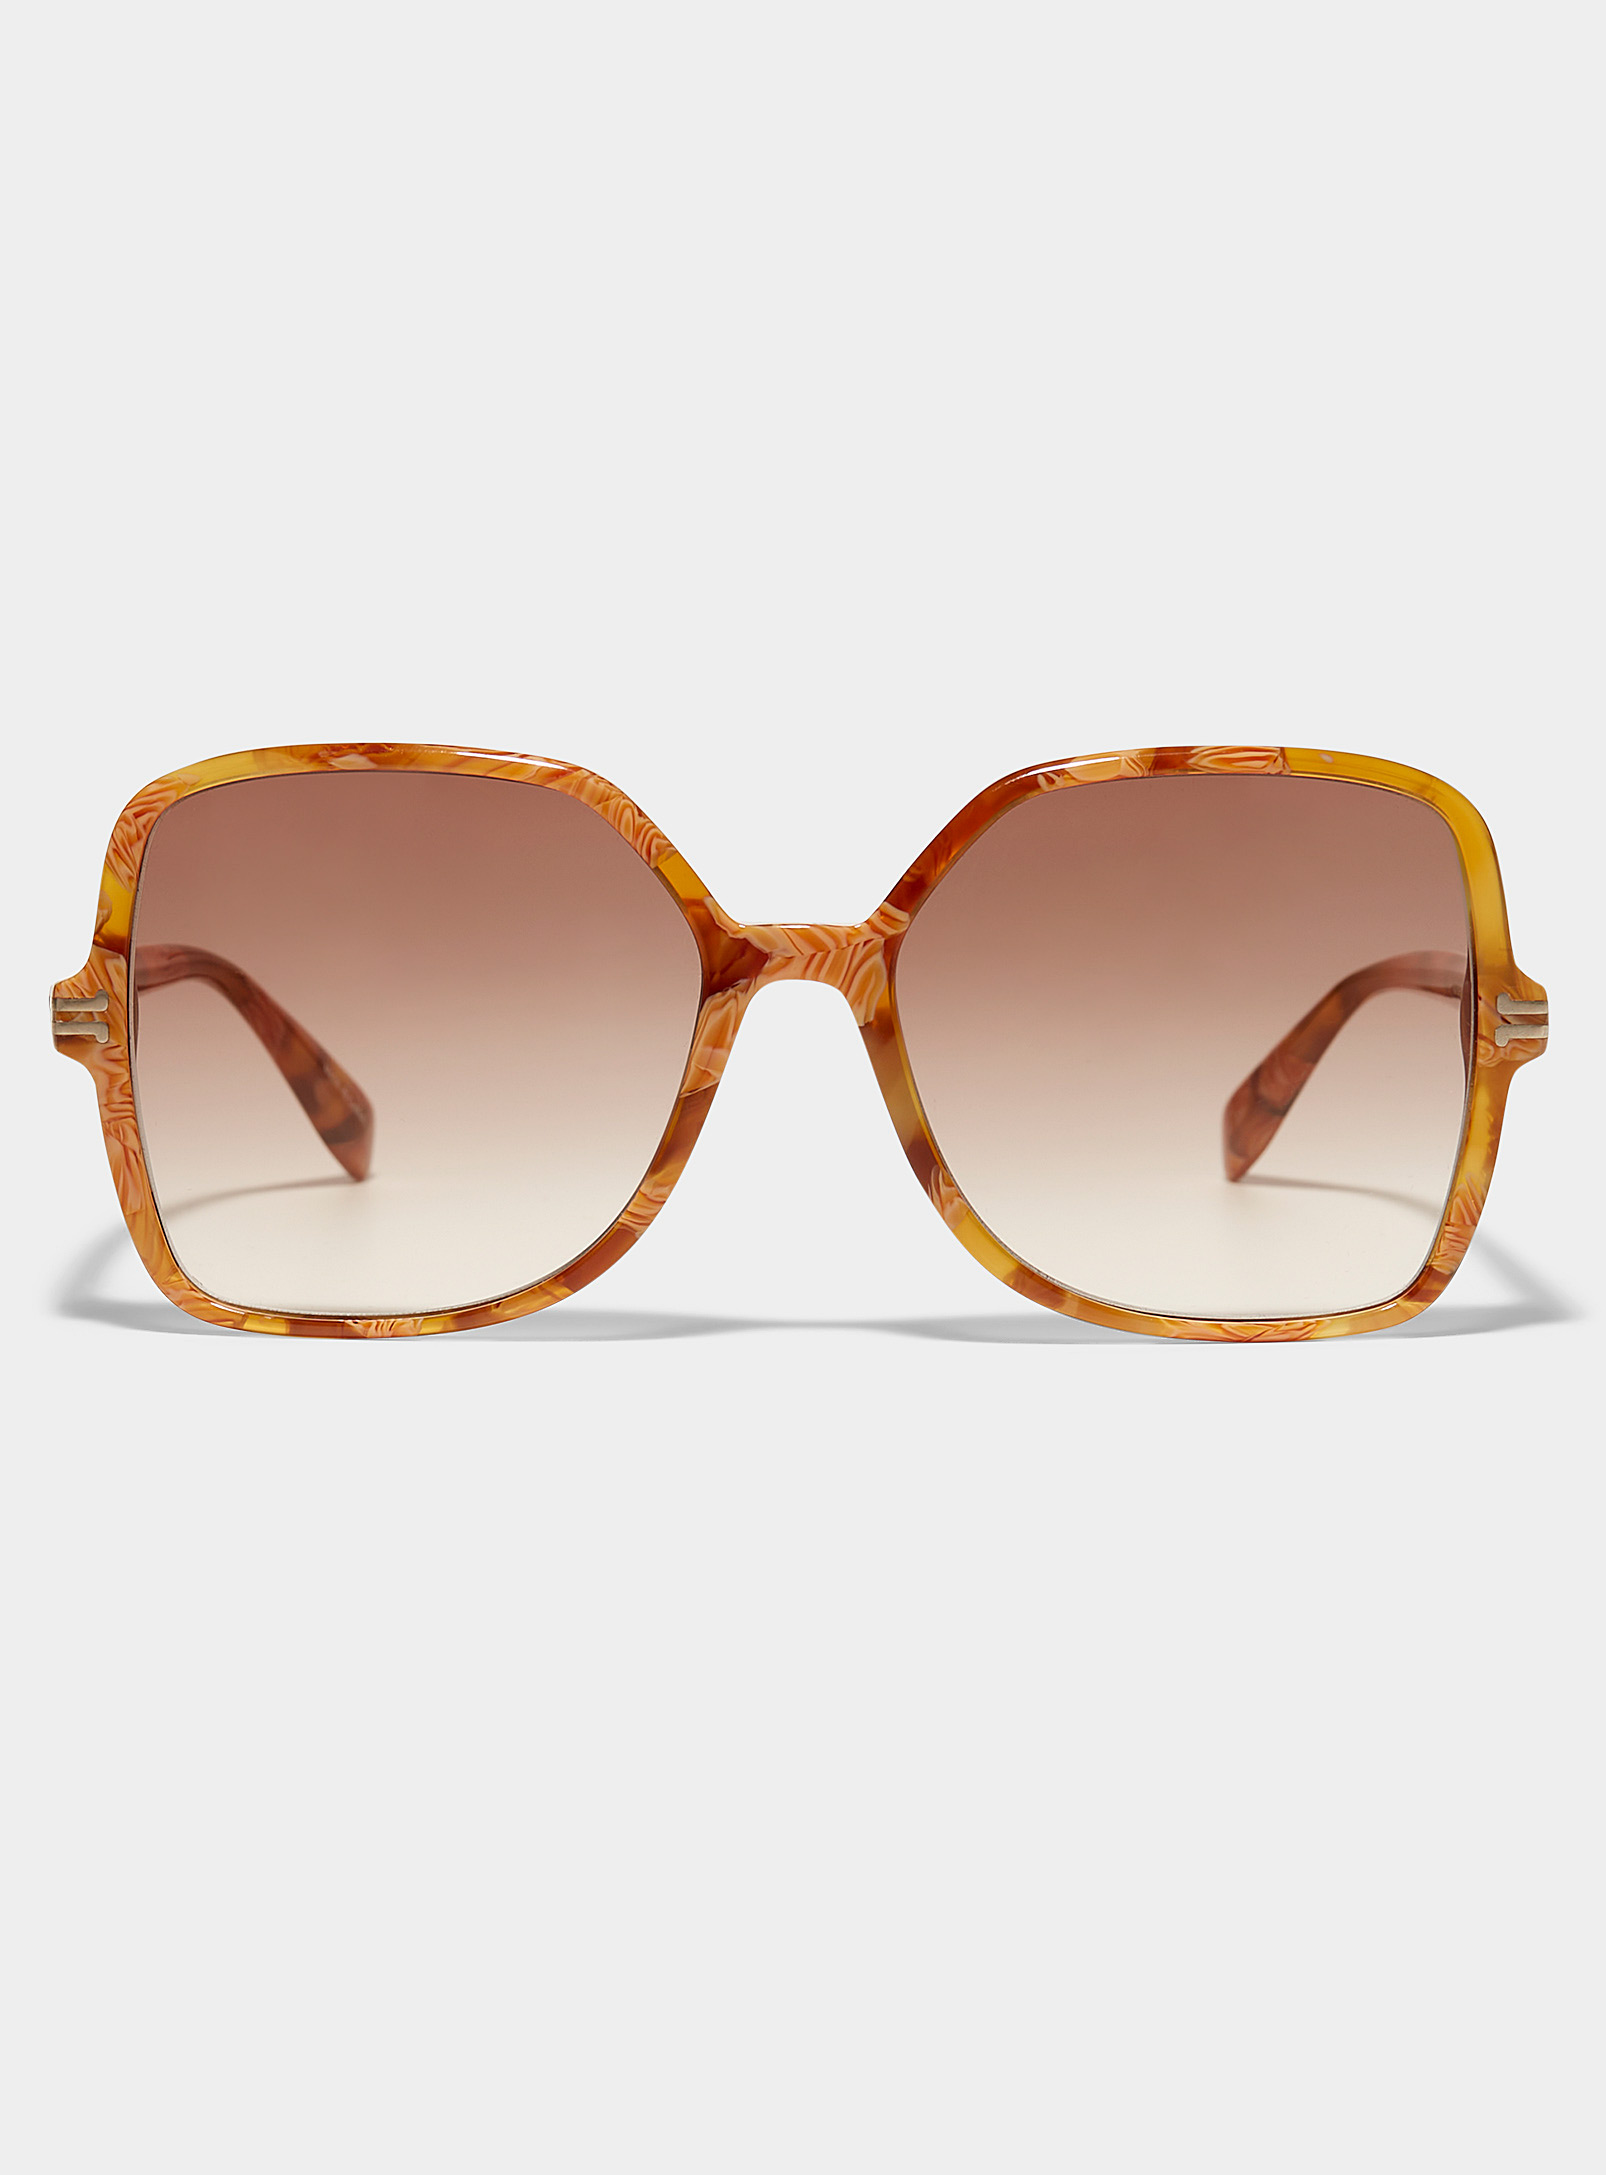 Marc Jacobs - Women's Marbled thin square sunglasses